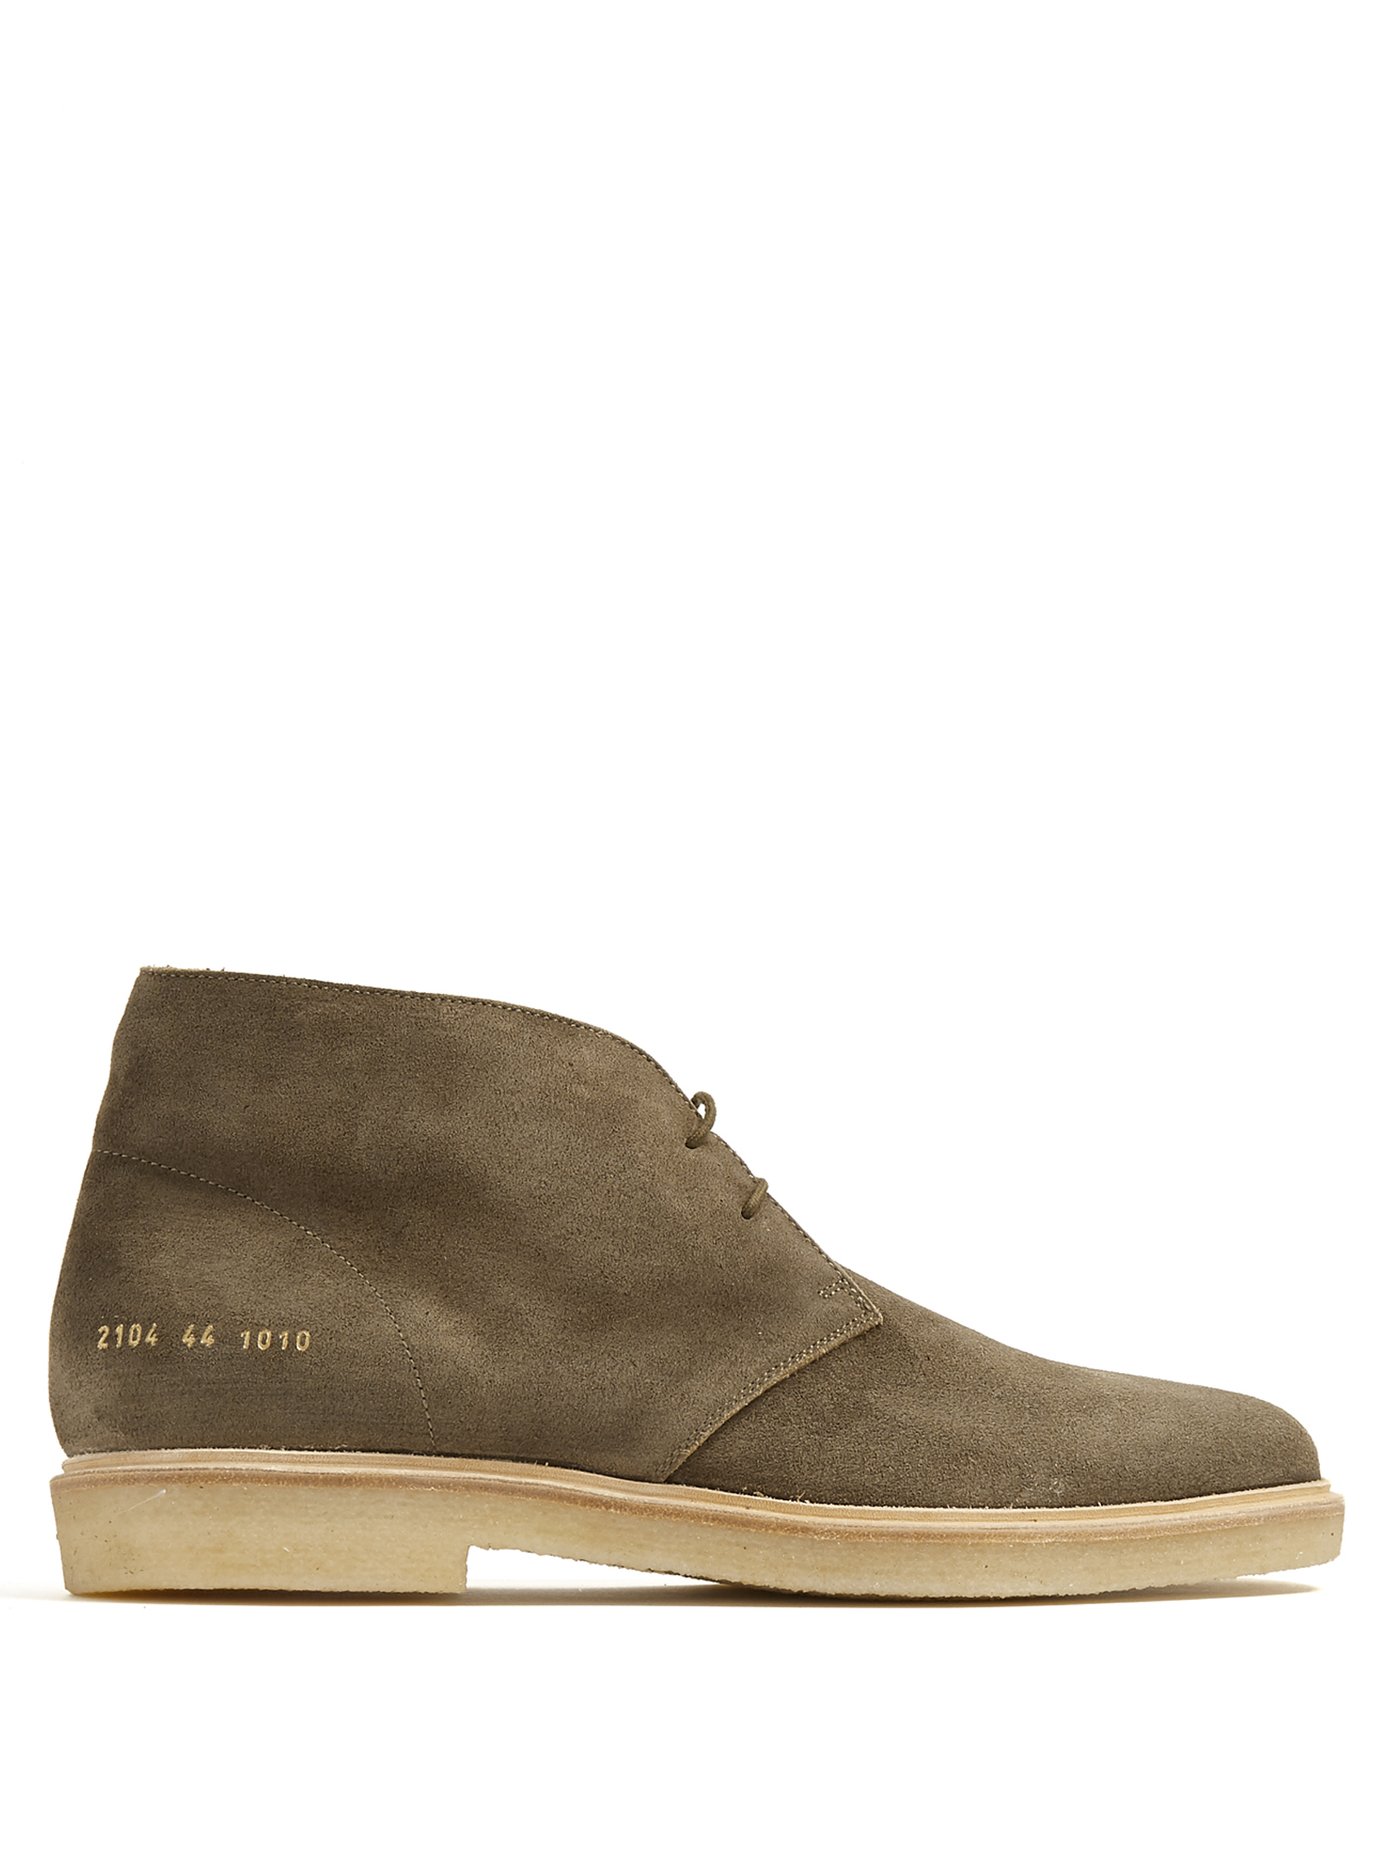 Suede desert boots | Common Projects 